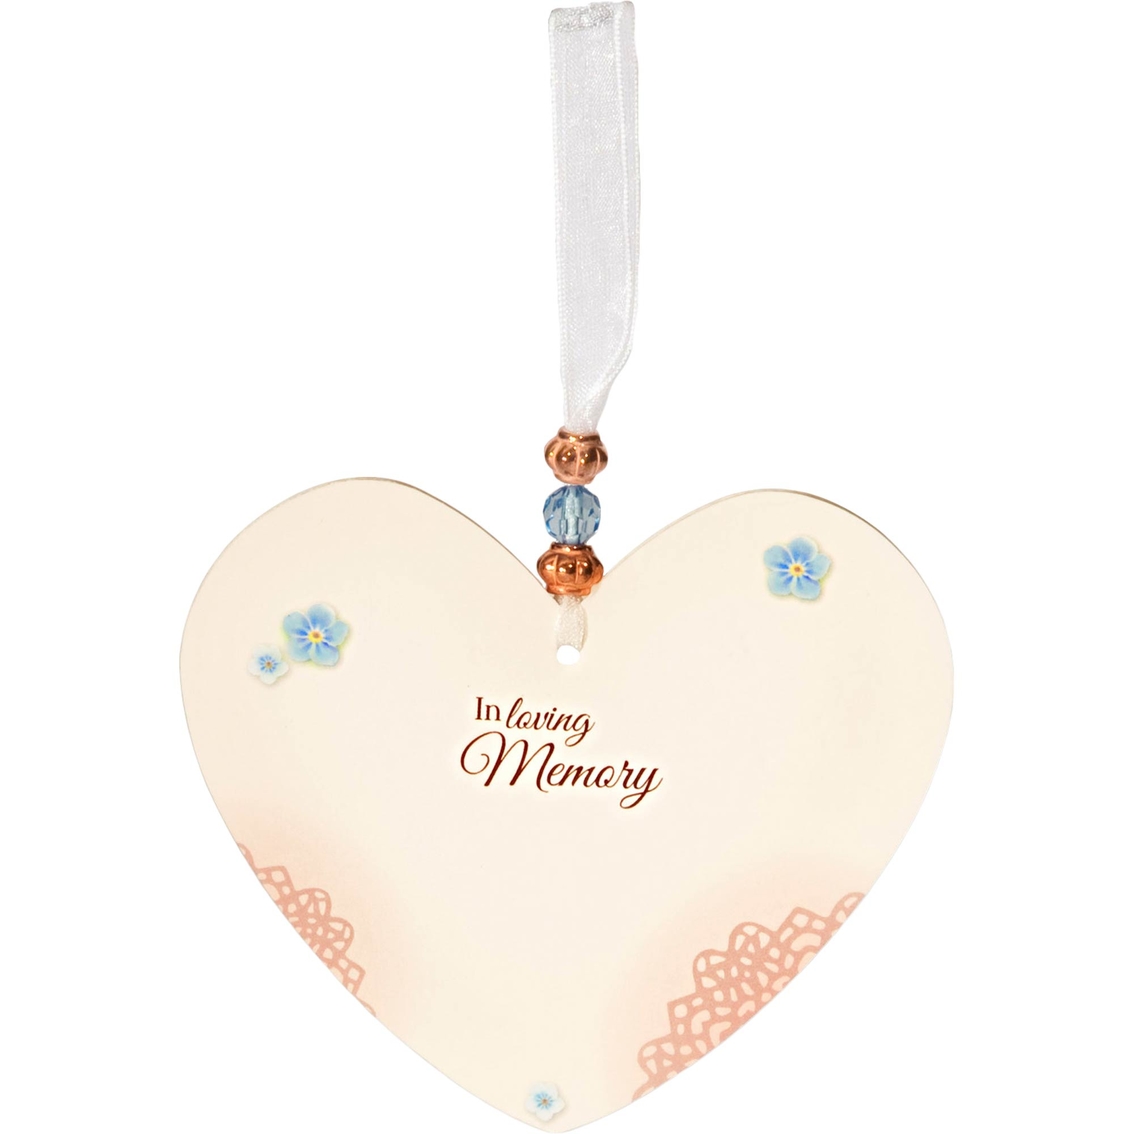 Pavilion Forever In My Heart Ornament - Image 2 of 4